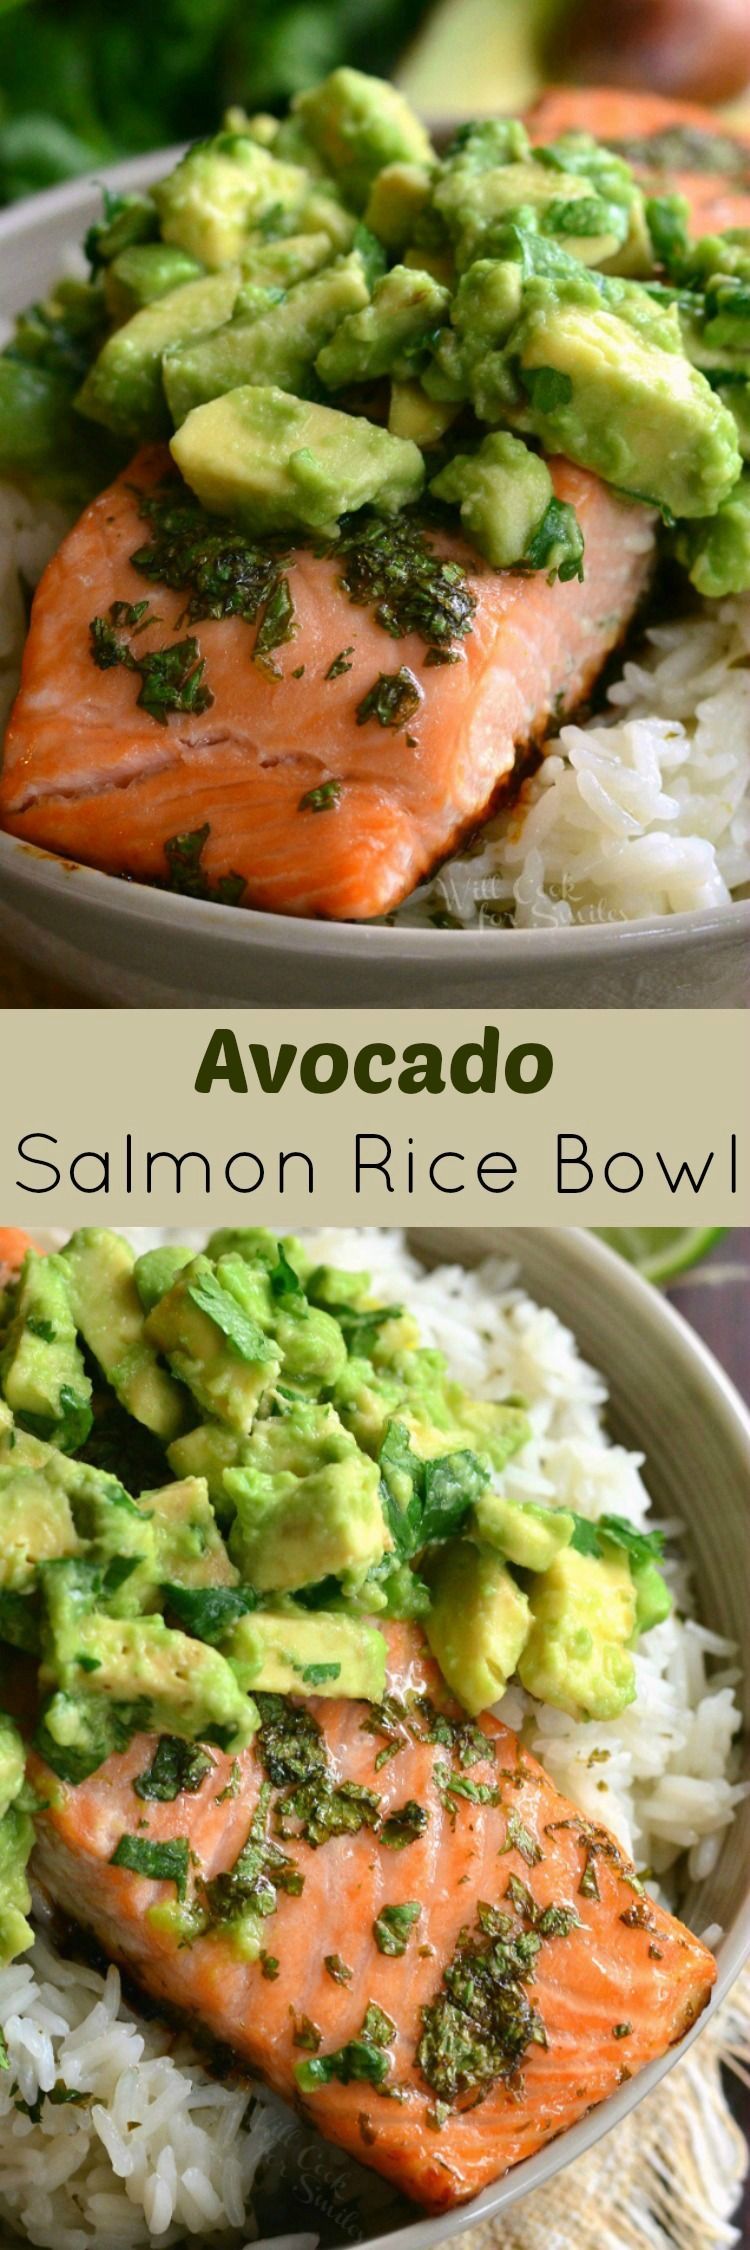 Avocado Salmon Rice Bowl. Beautiful honey, lime, and cilantro flavors come together is this tasty salmon rice bowl.